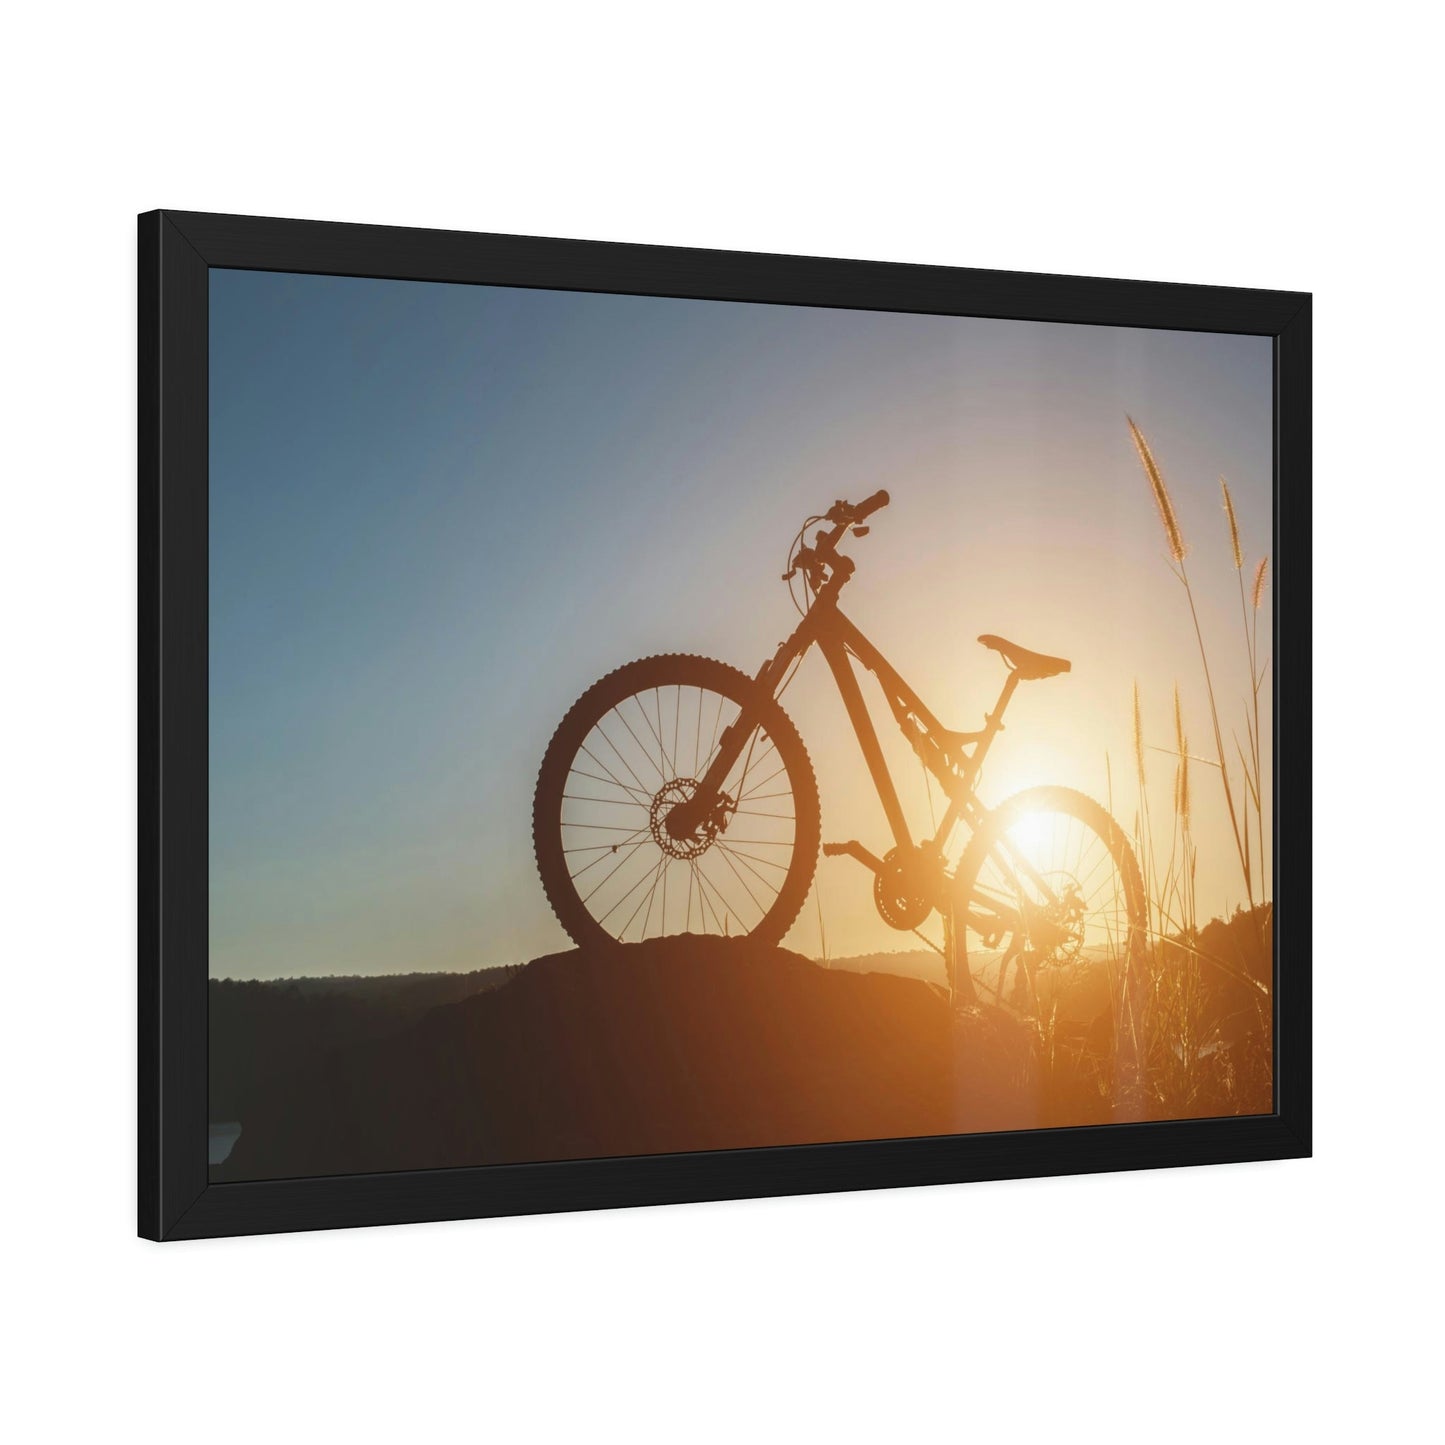 Bicycles at Dawn: Scenic Poster for Your Home Office